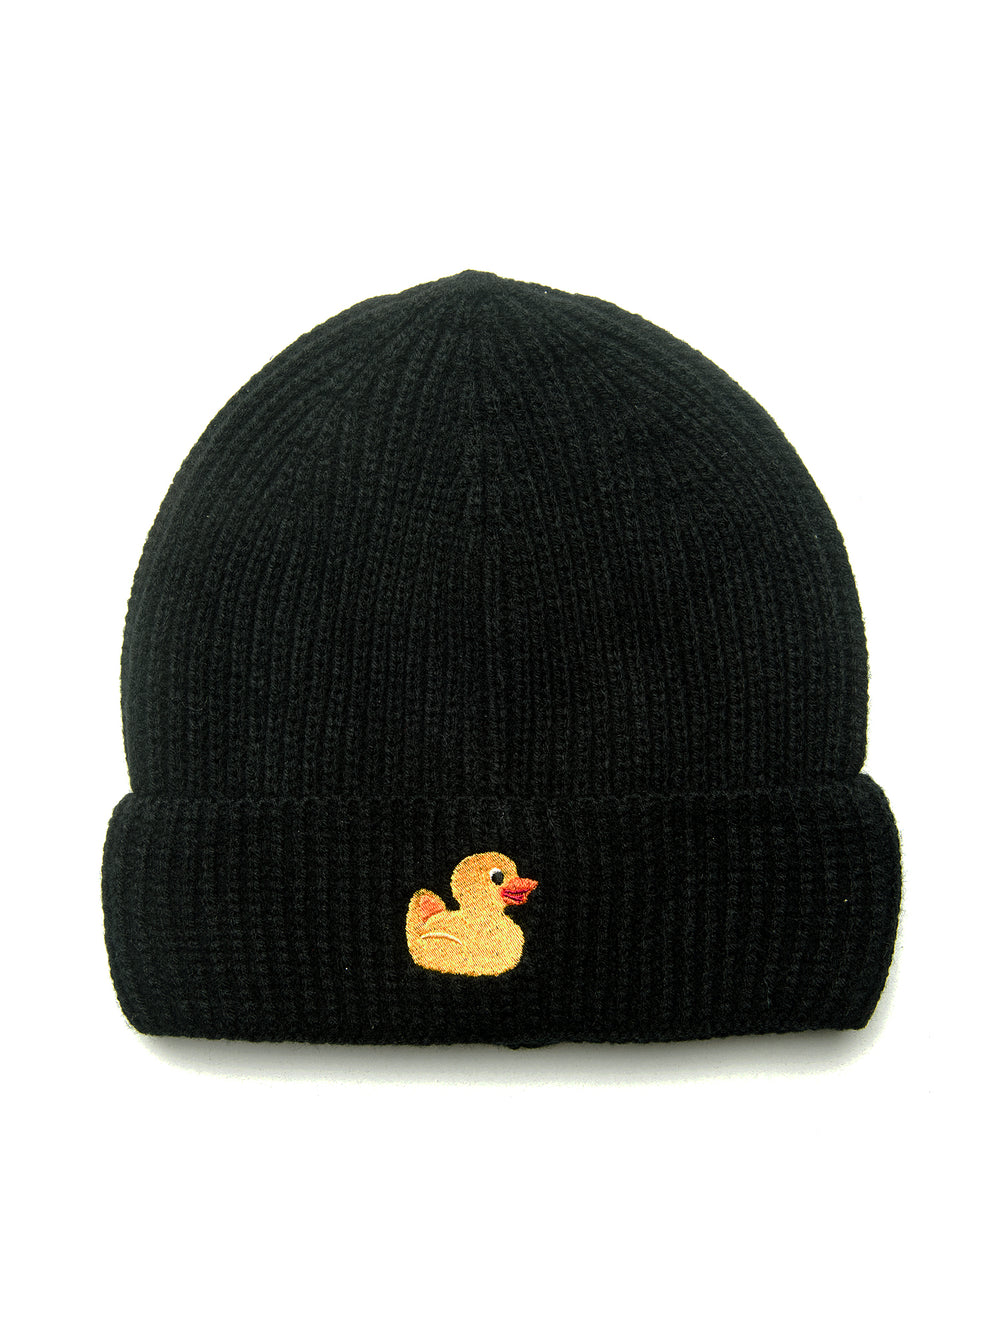 HARLOW RIBBED EMBROIDERED BEANIE - CLEARANCE